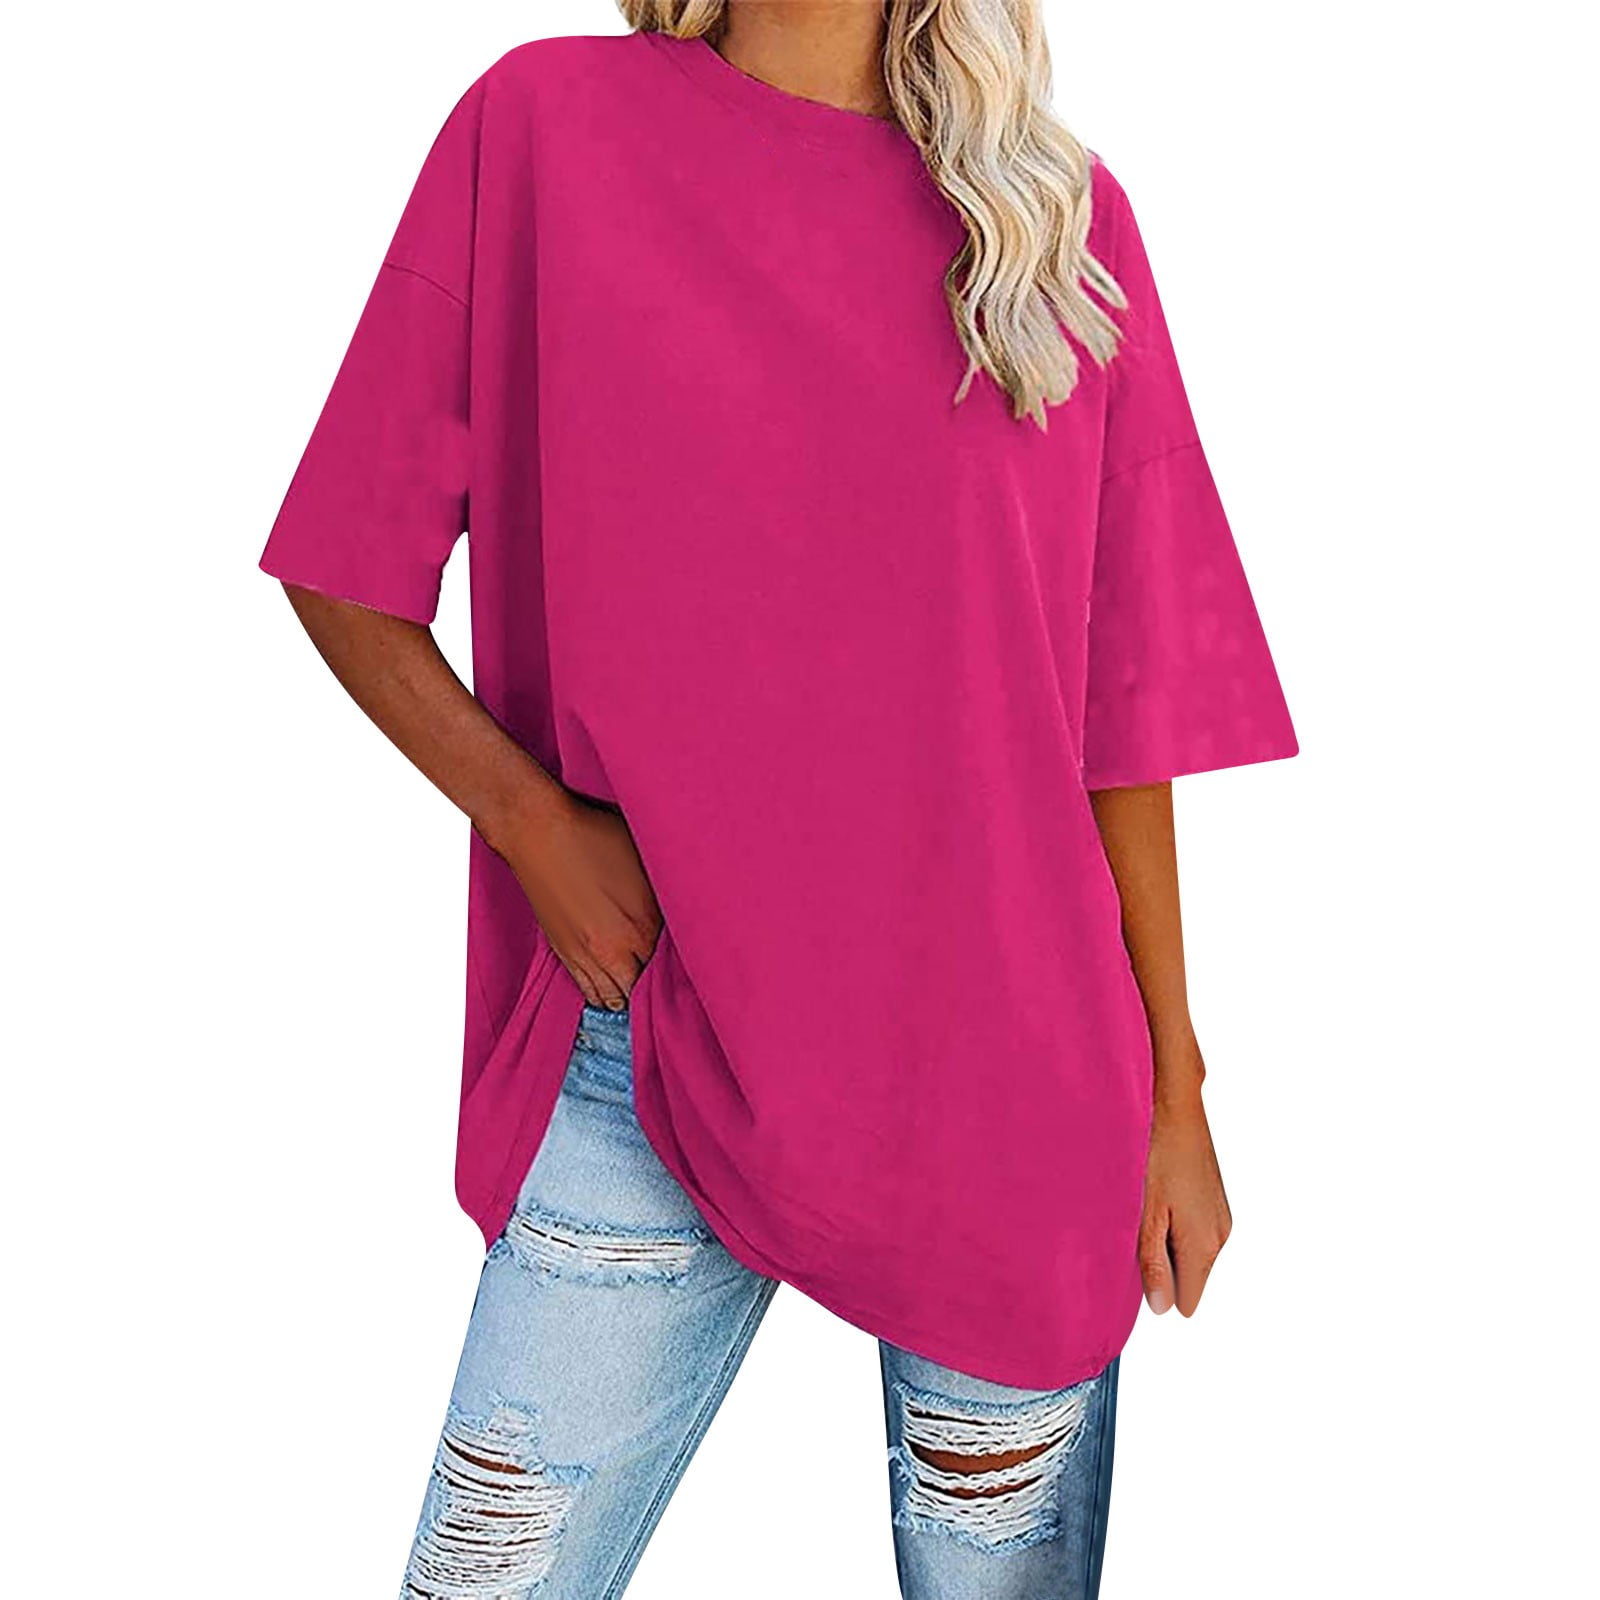 Knosfe Womens Tunic Tops Size Plus Size Clearance Half Sleeve Elbow ...